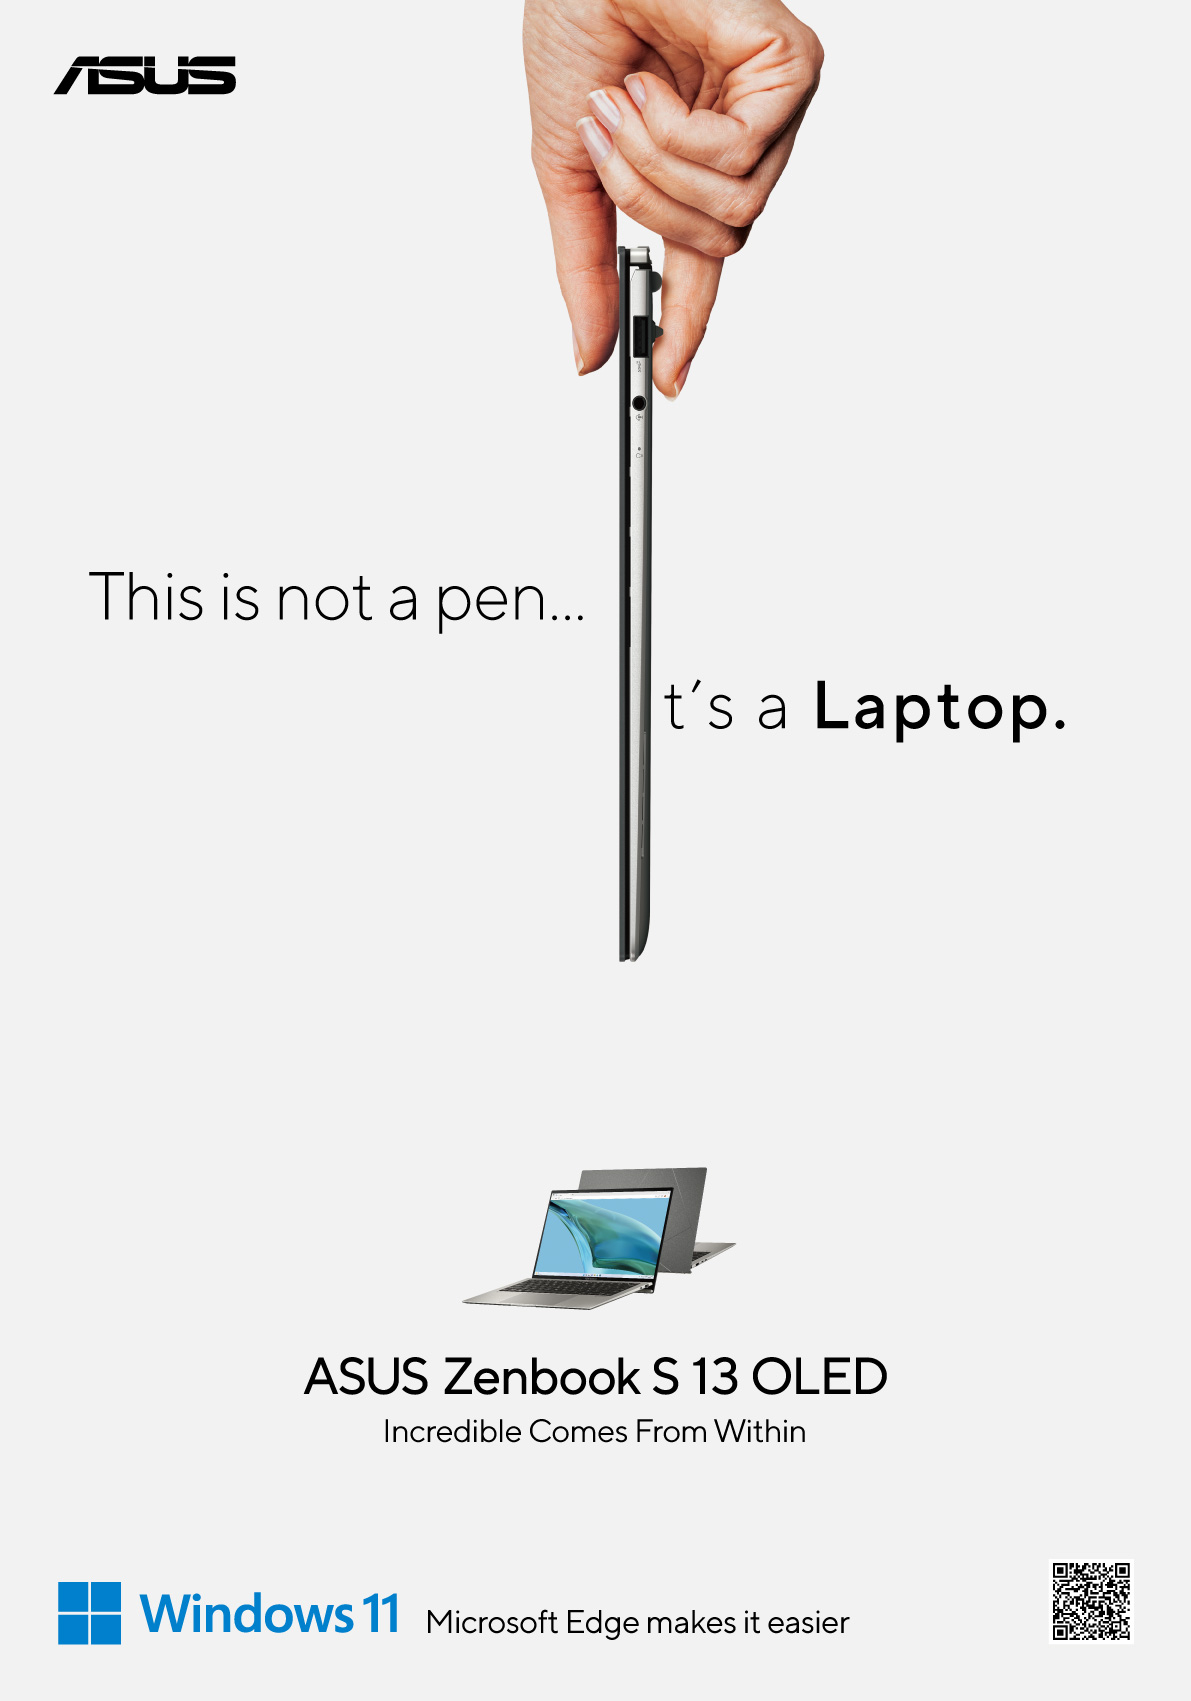 New Asus ZenBook S 13 OLED